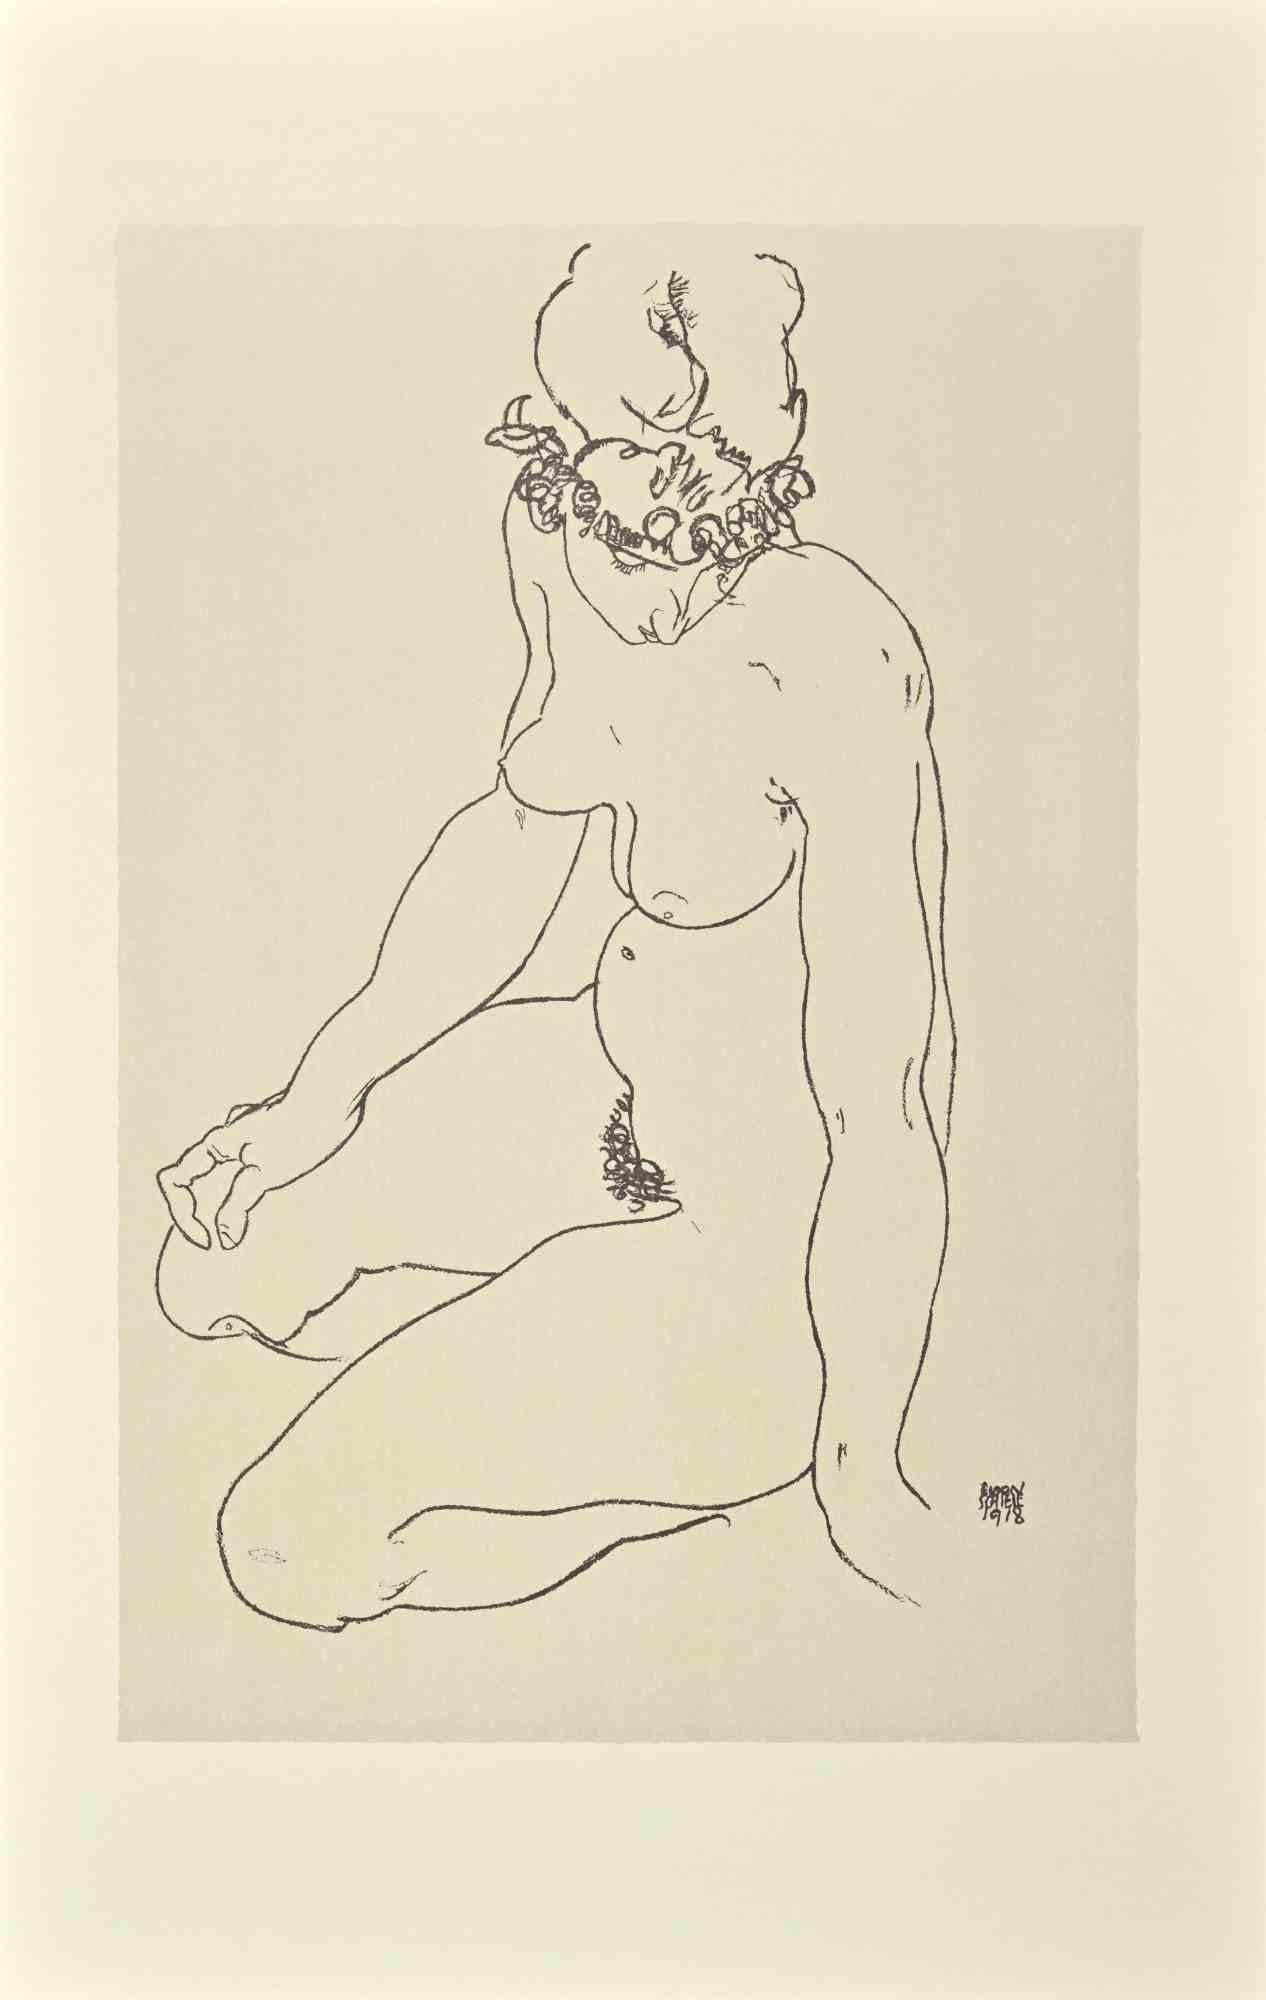 Egon Schiele Portrait Print - Kneeling Female Nude, Turning to the Right - Lithograph - 2007